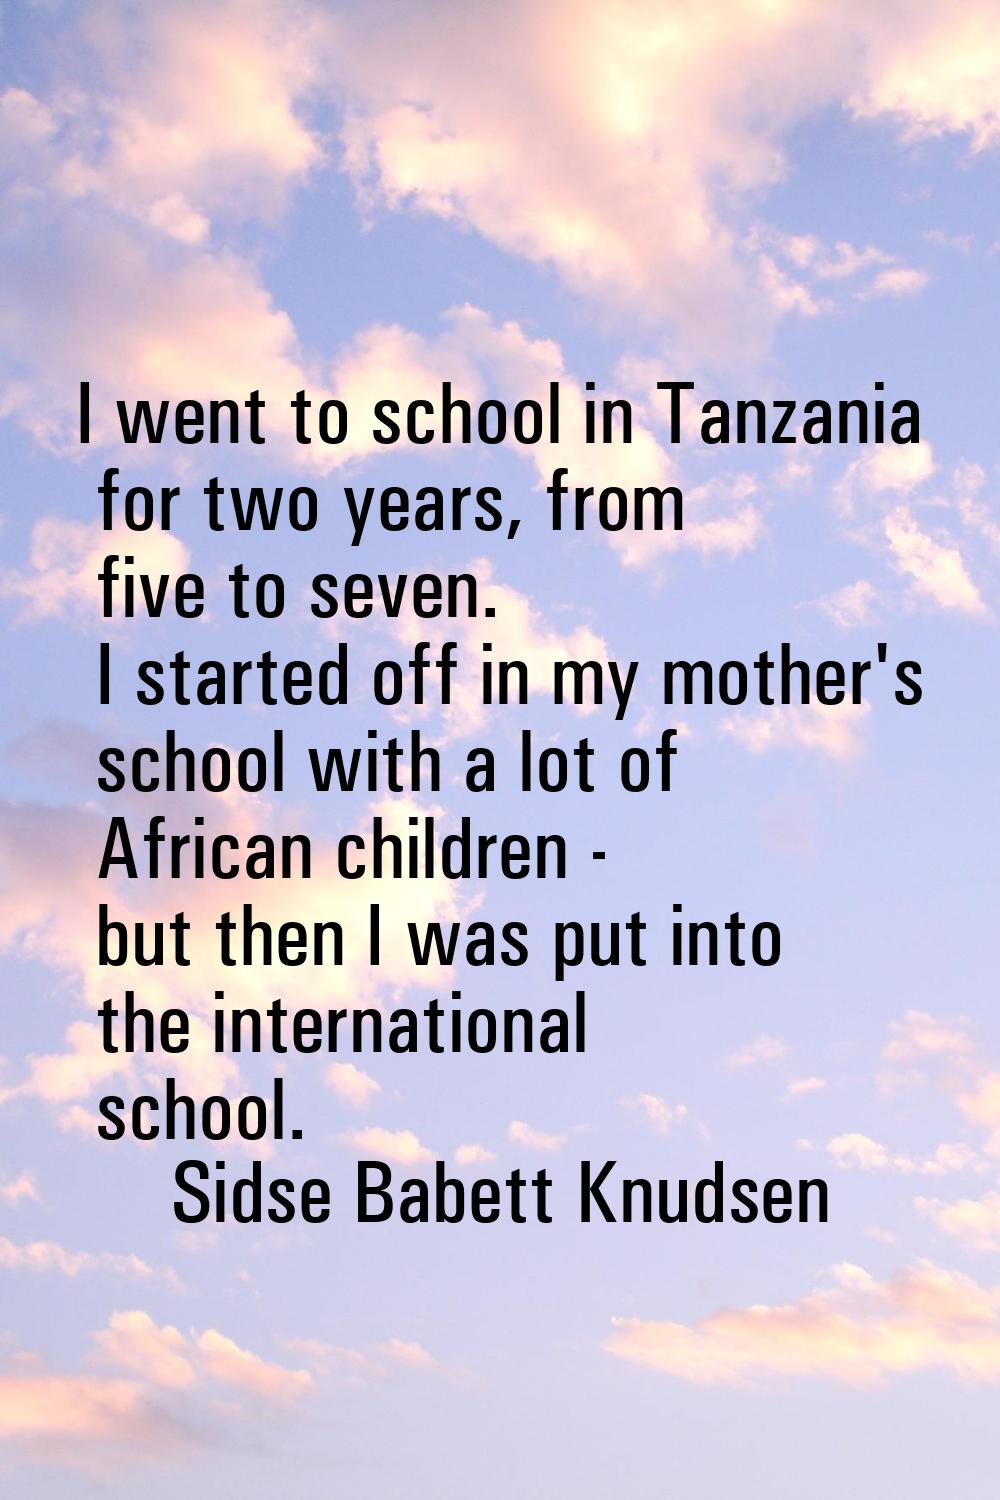 I went to school in Tanzania for two years, from five to seven. I started off in my mother's school